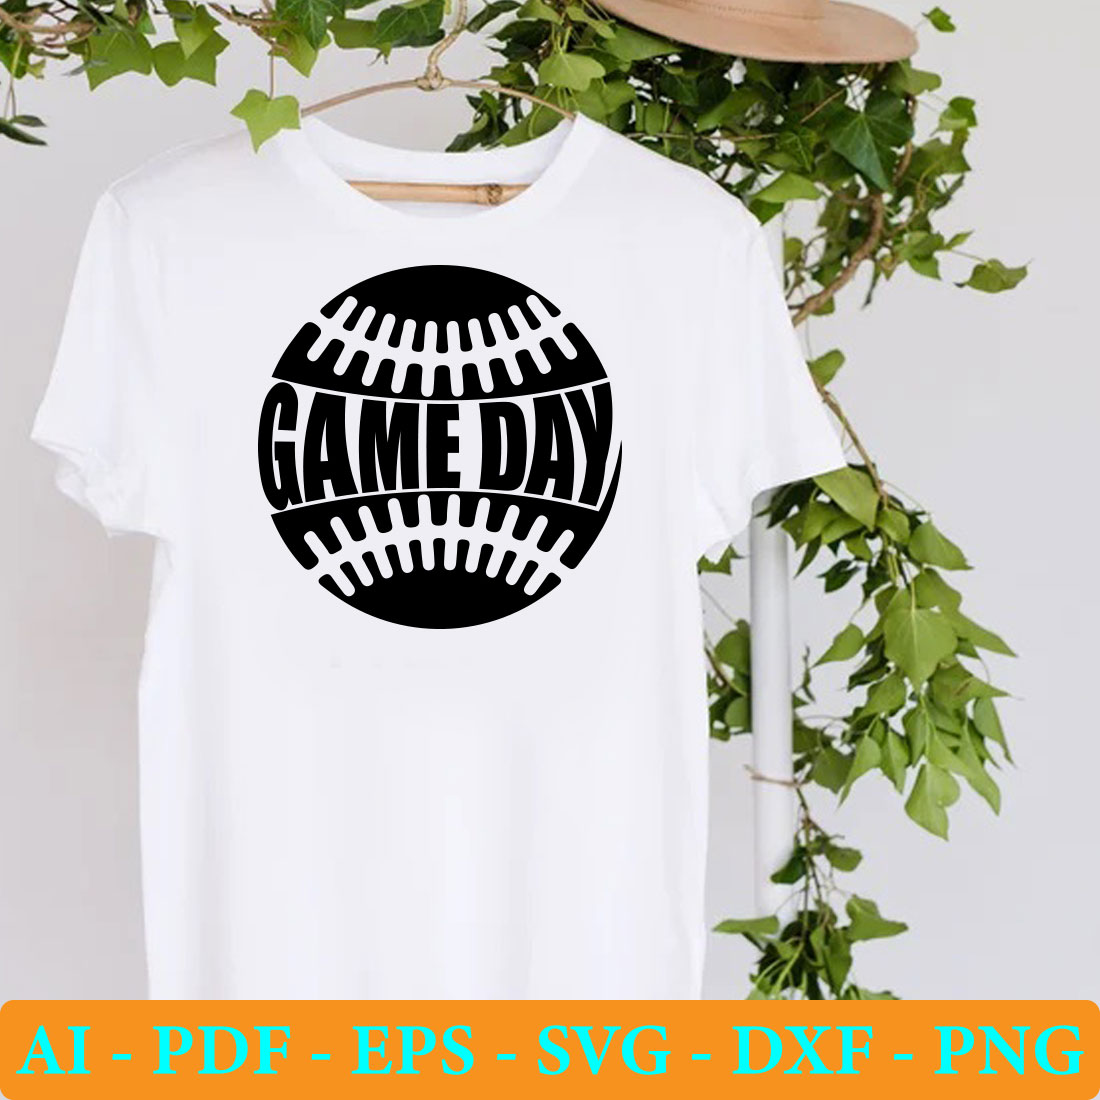 T - shirt that says game day with a baseball on it.